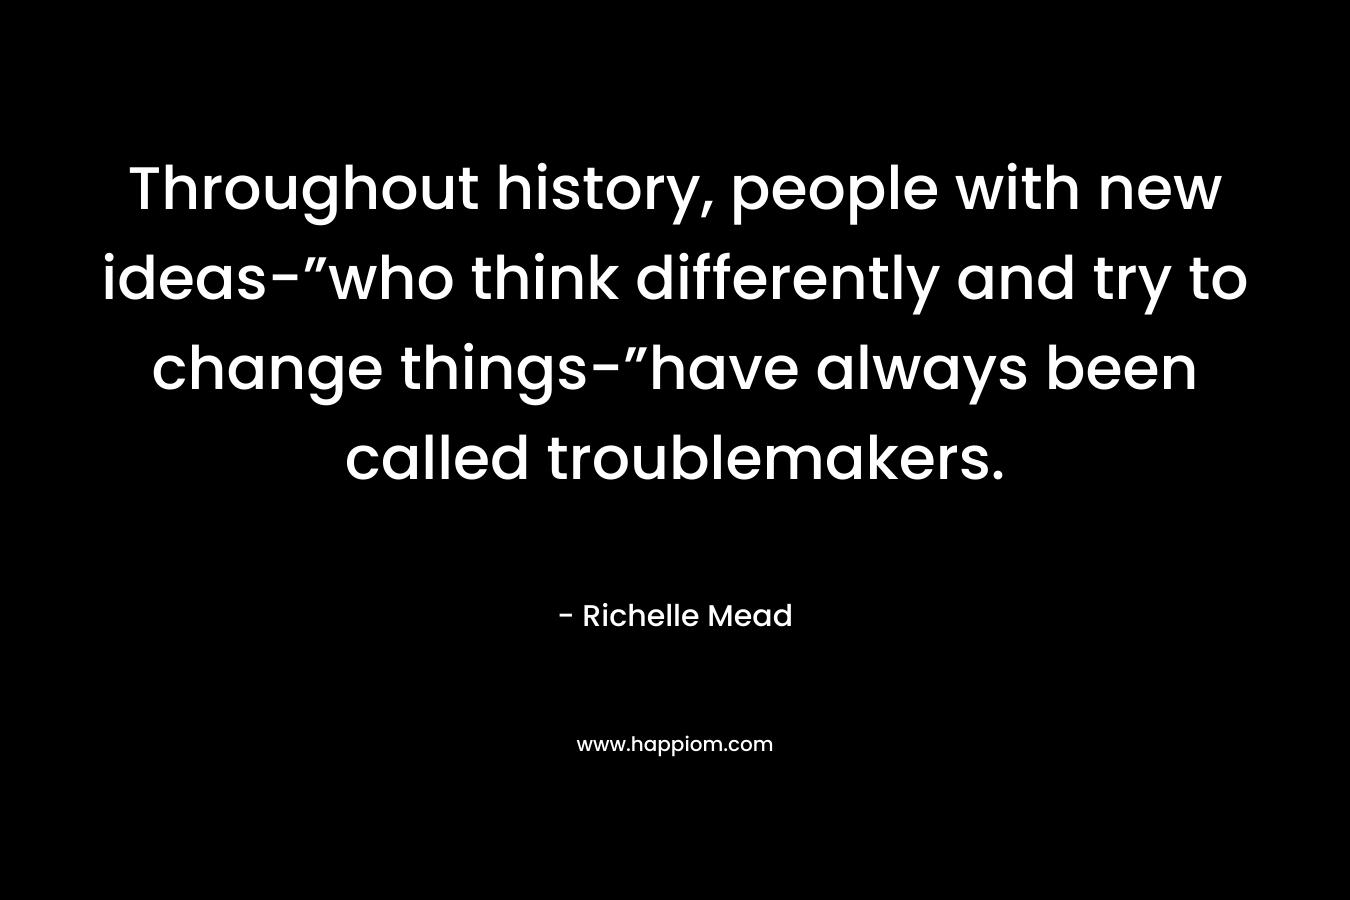 Throughout history, people with new ideas-”who think differently and try to change things-”have always been called troublemakers. – Richelle Mead